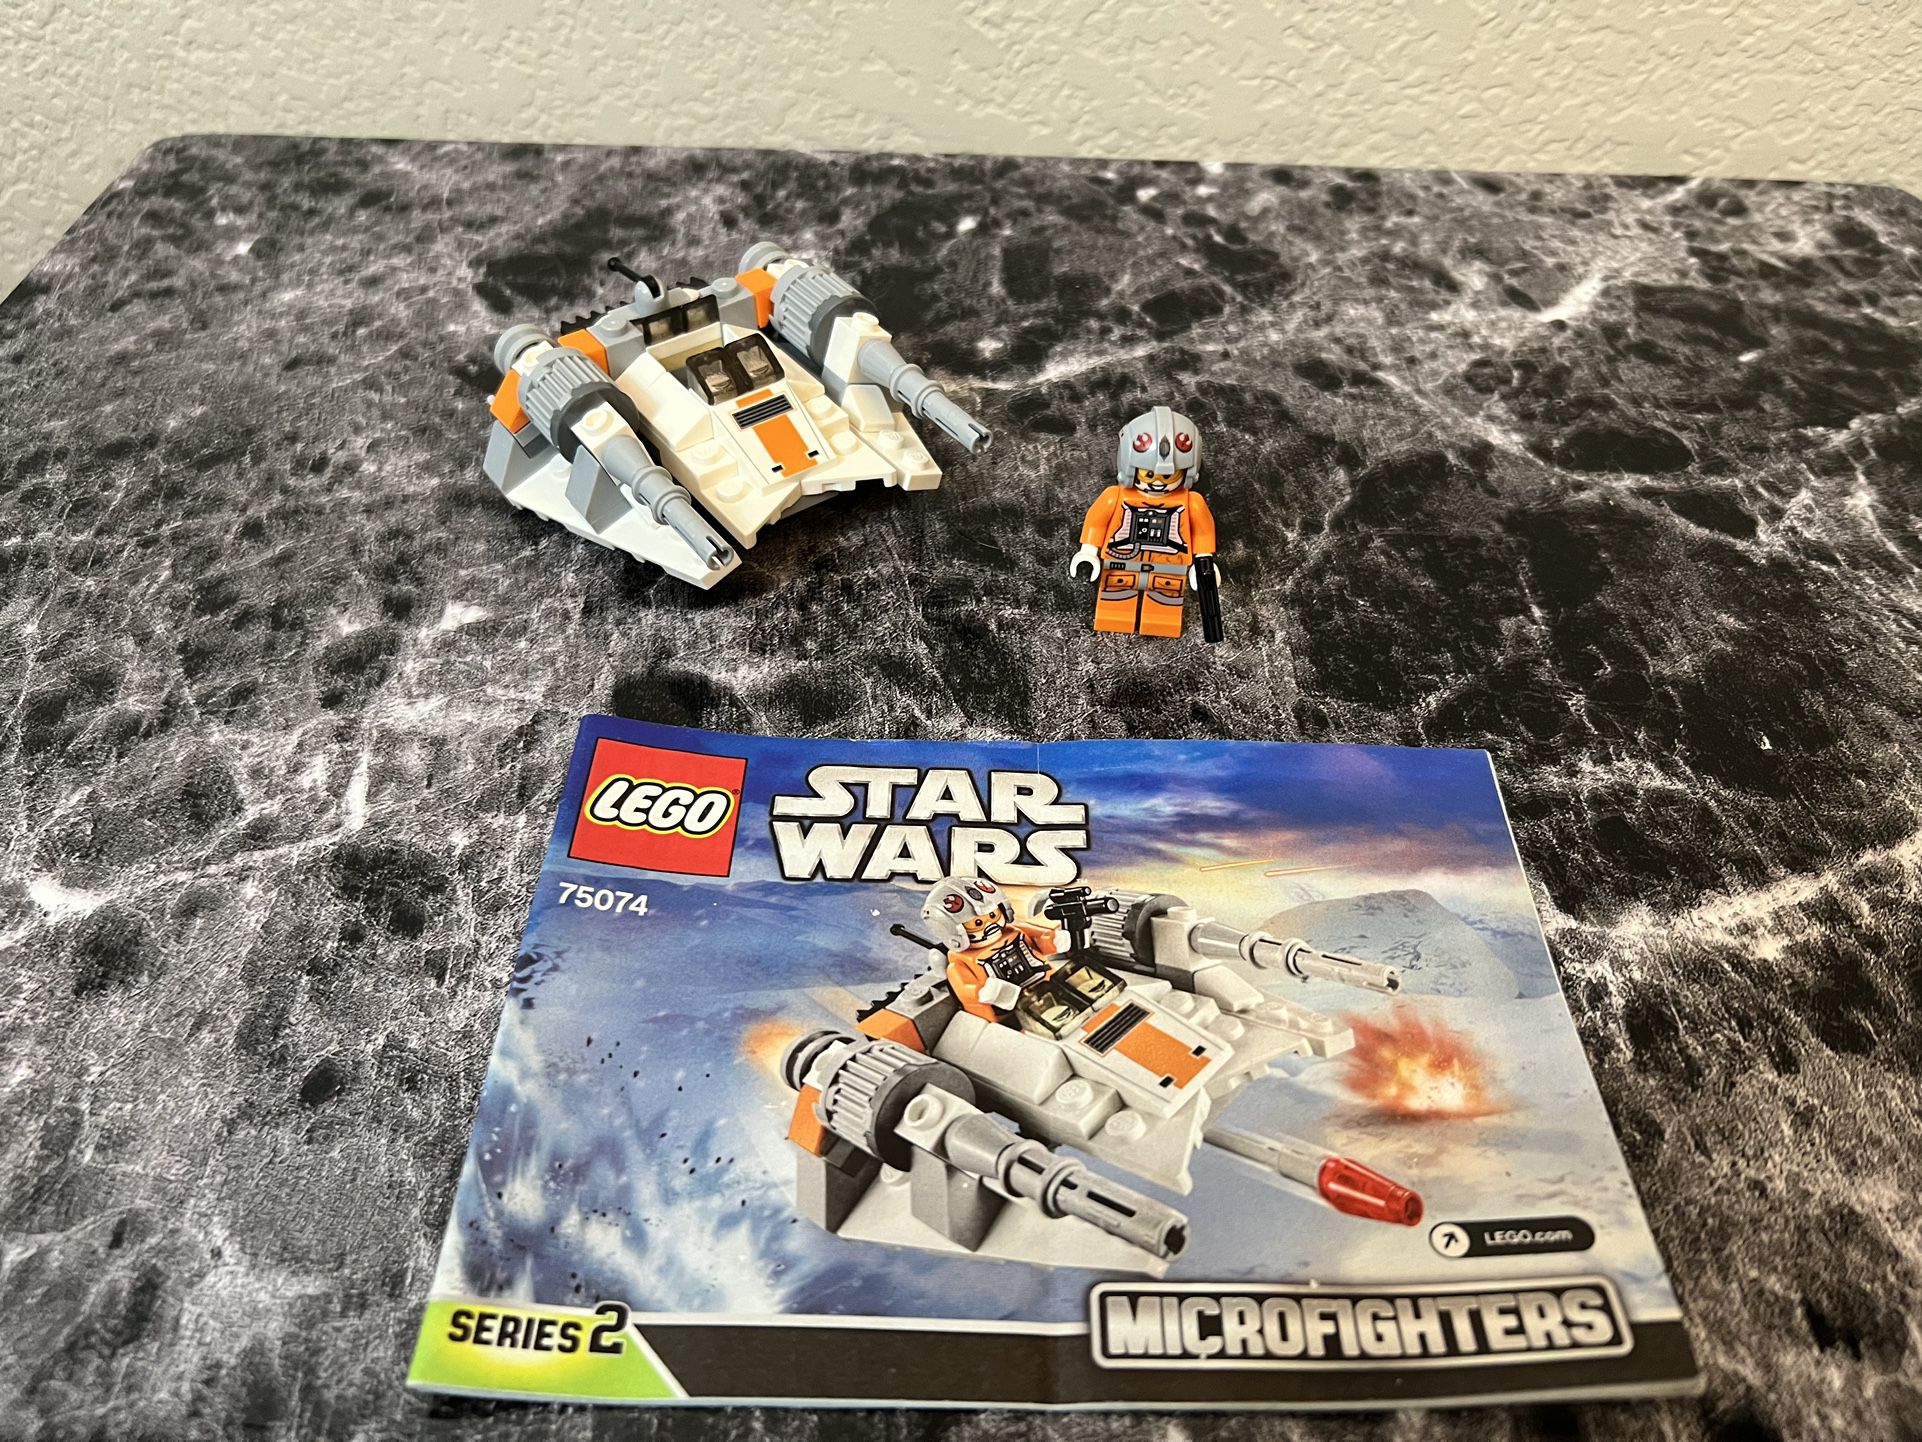 LEGO Star Wars: Microfighter (75074) for Sale in Las NV OfferUp